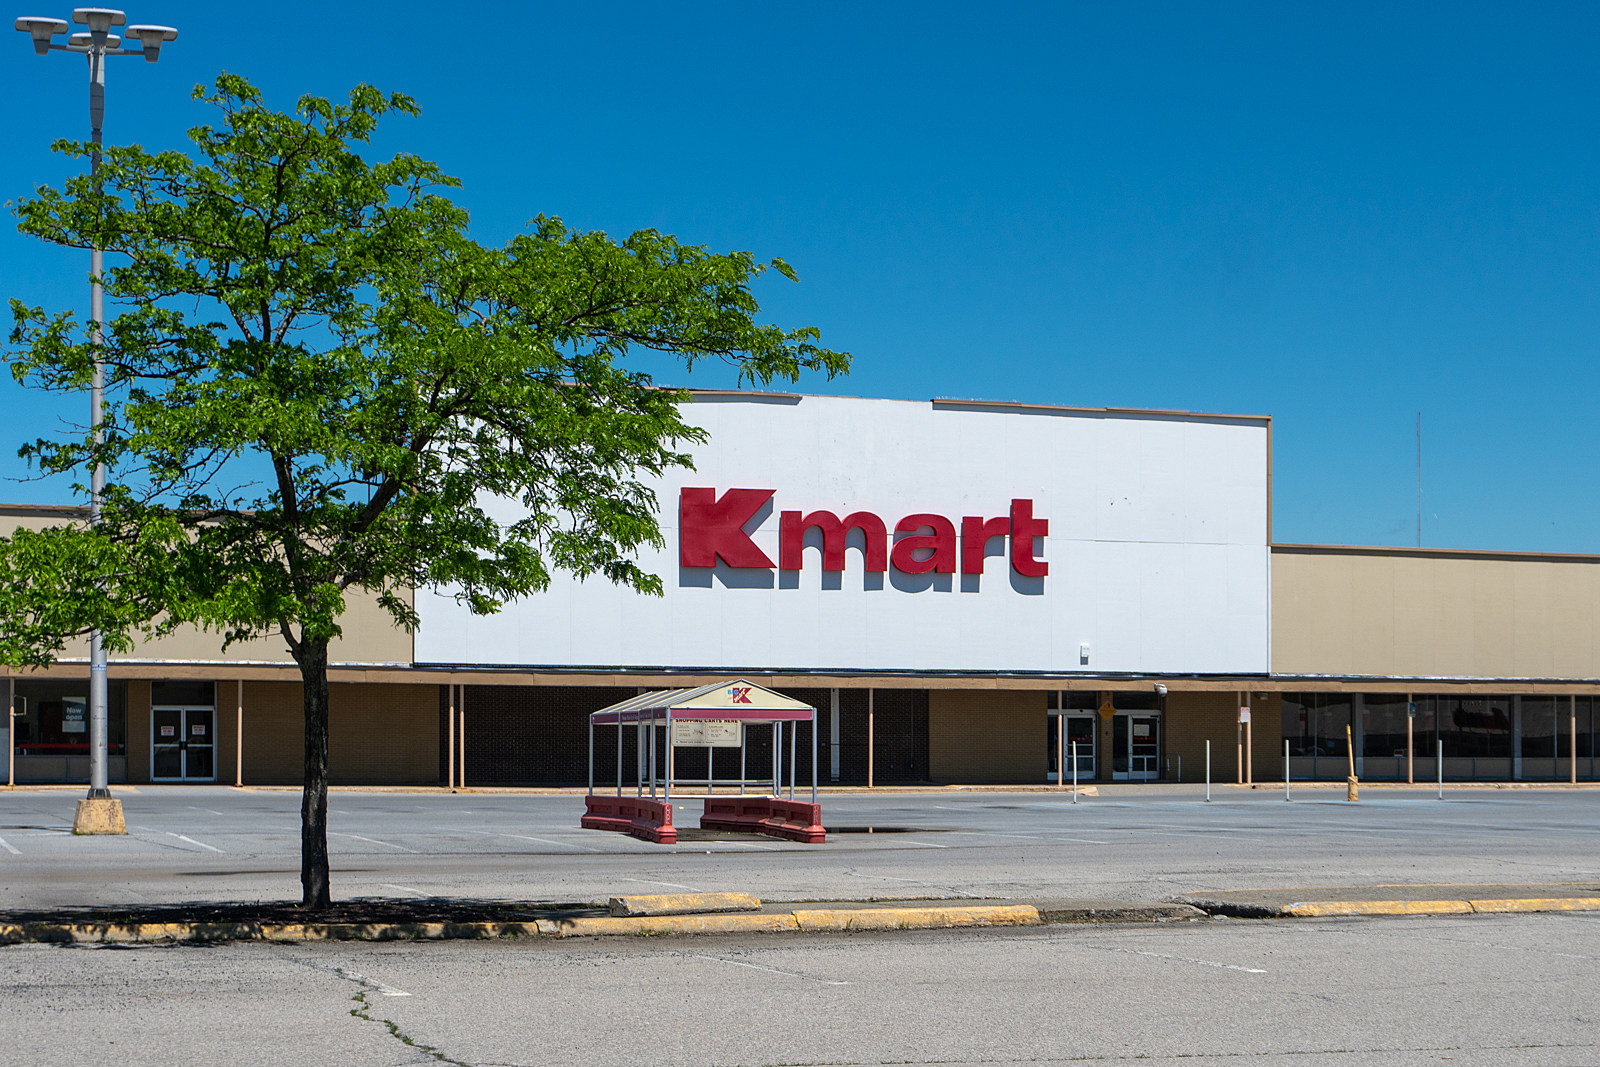 Avenel closing means only one Kmart will be left in all of NJ